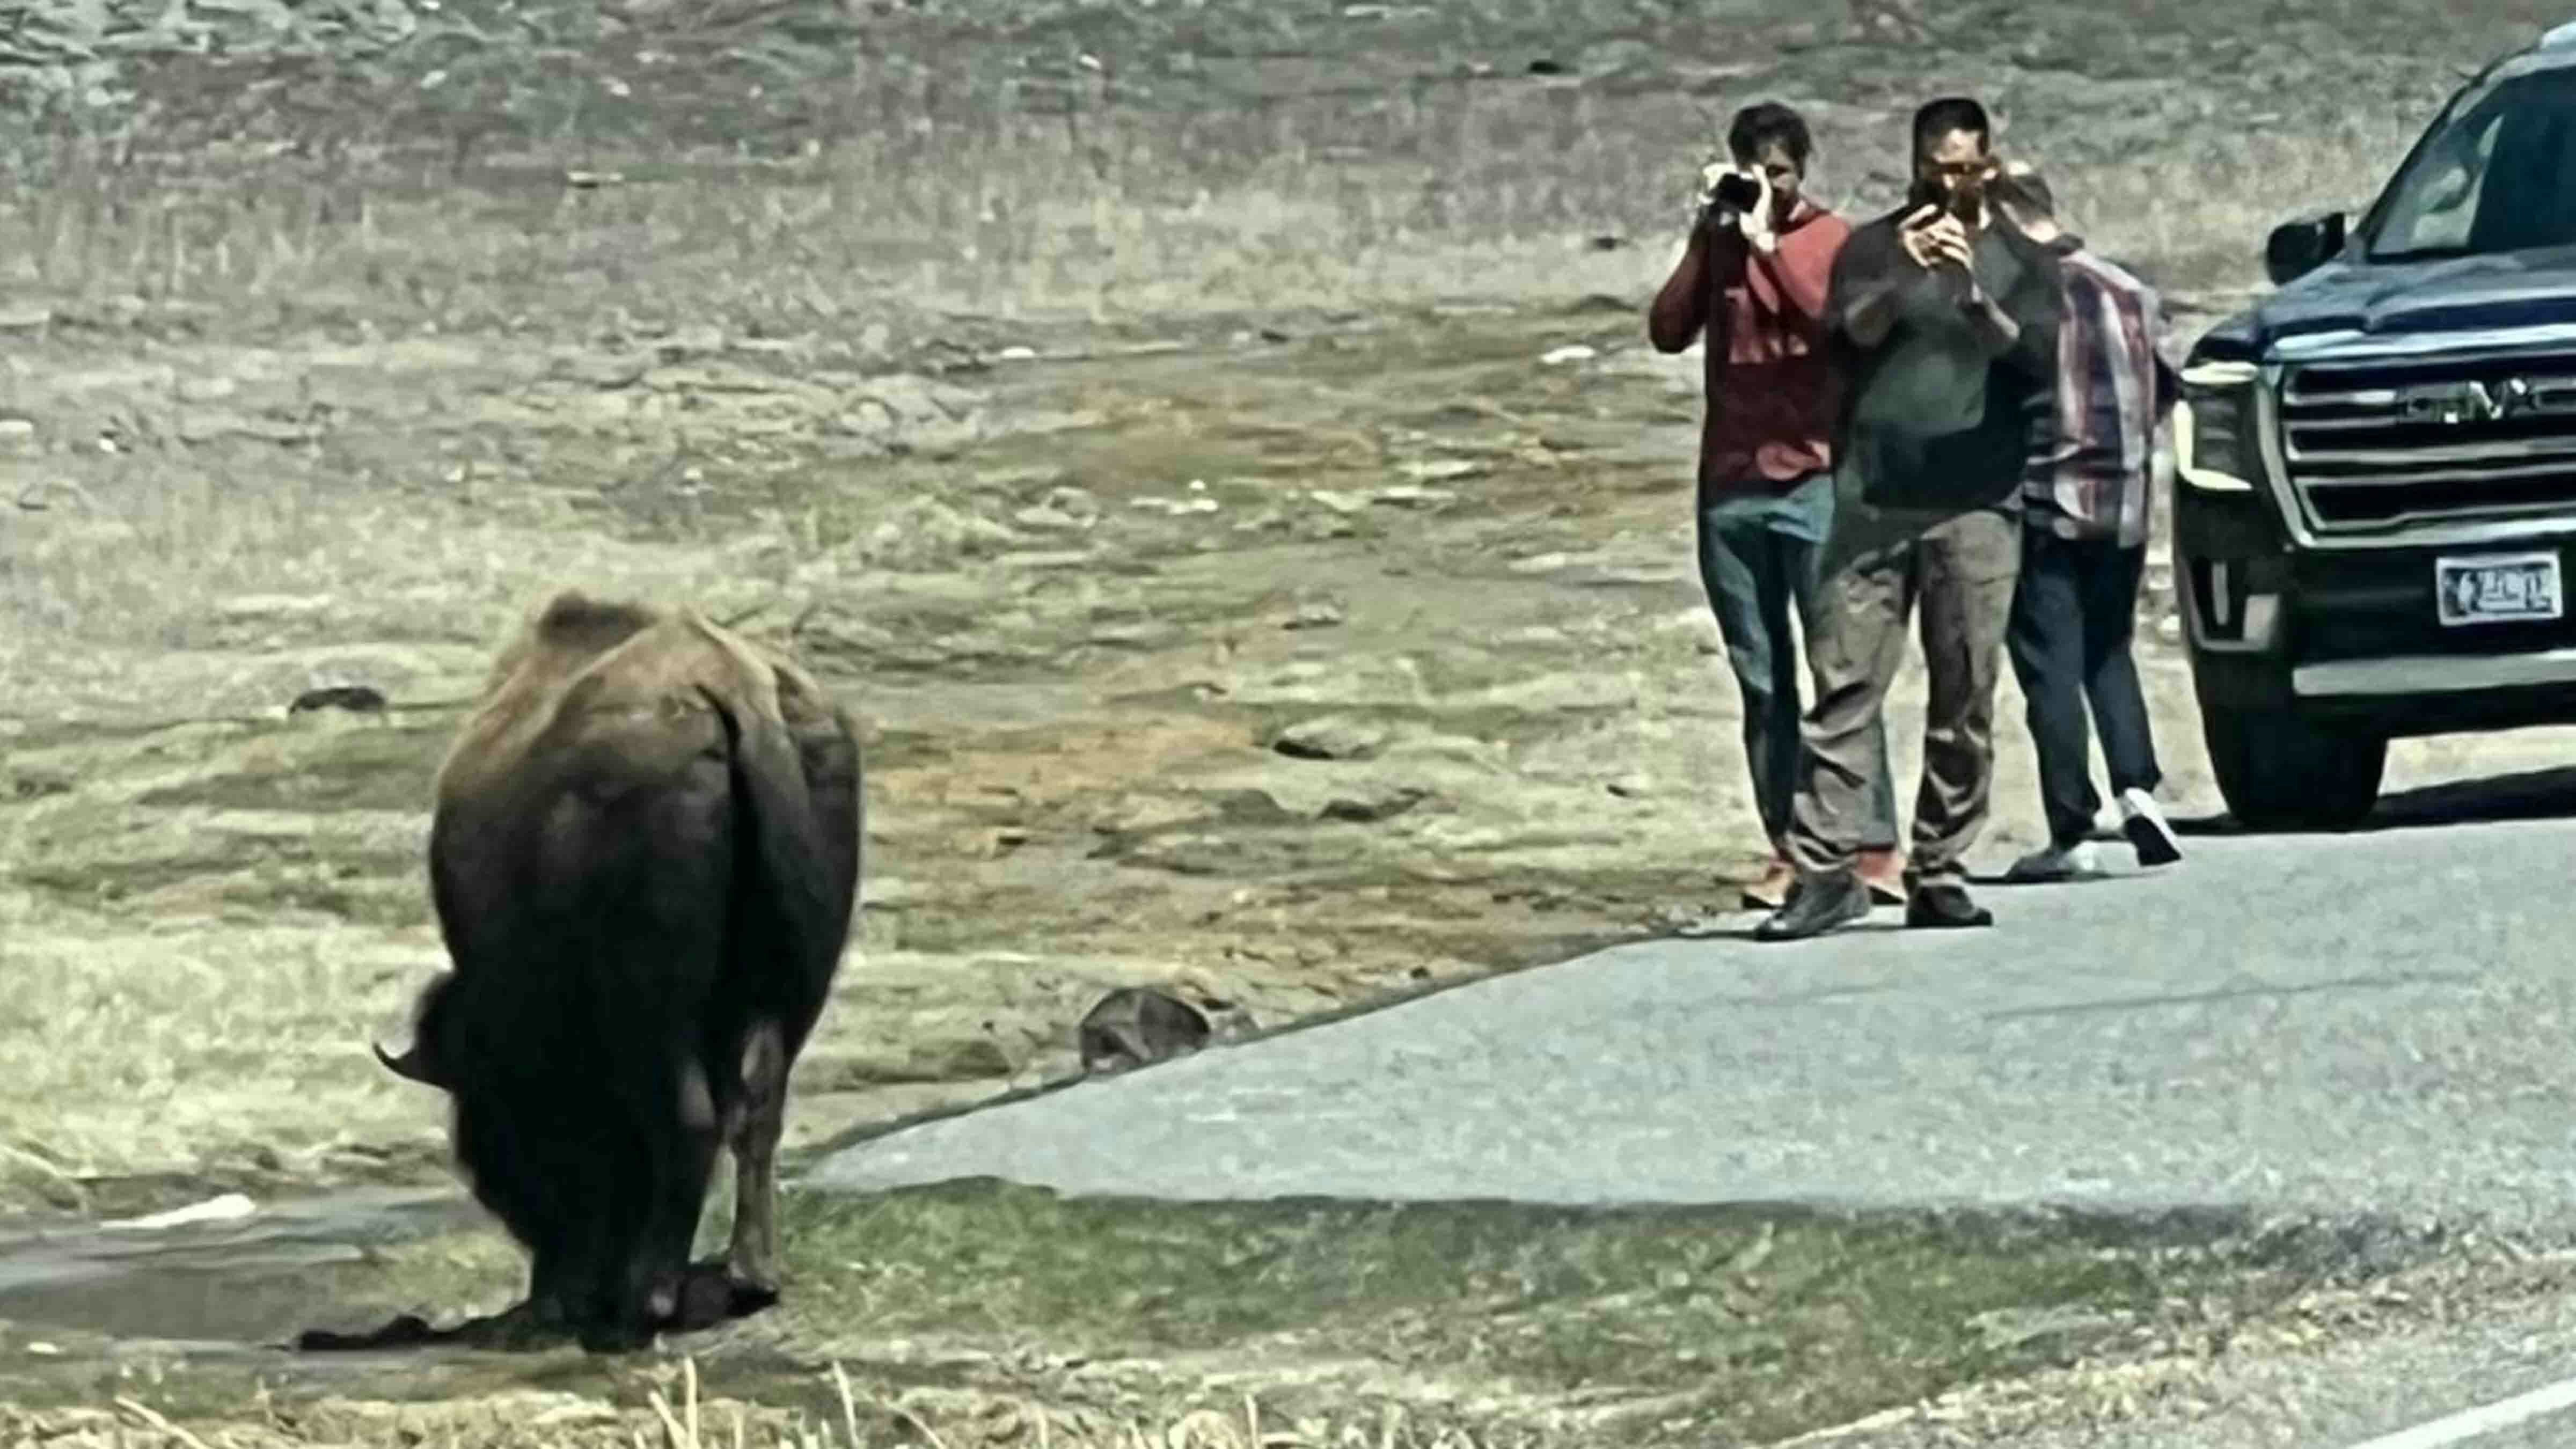 The 2024 tourist season has just begun in Yellowstone, and there are already plenty of incidents of people getting too close to wildlife, like in this recent file photo. On Monday, Yellowstone National Park annoucned the arrest of a man who not only allegedly harassed a herd of bison, he kicked one in the leg.